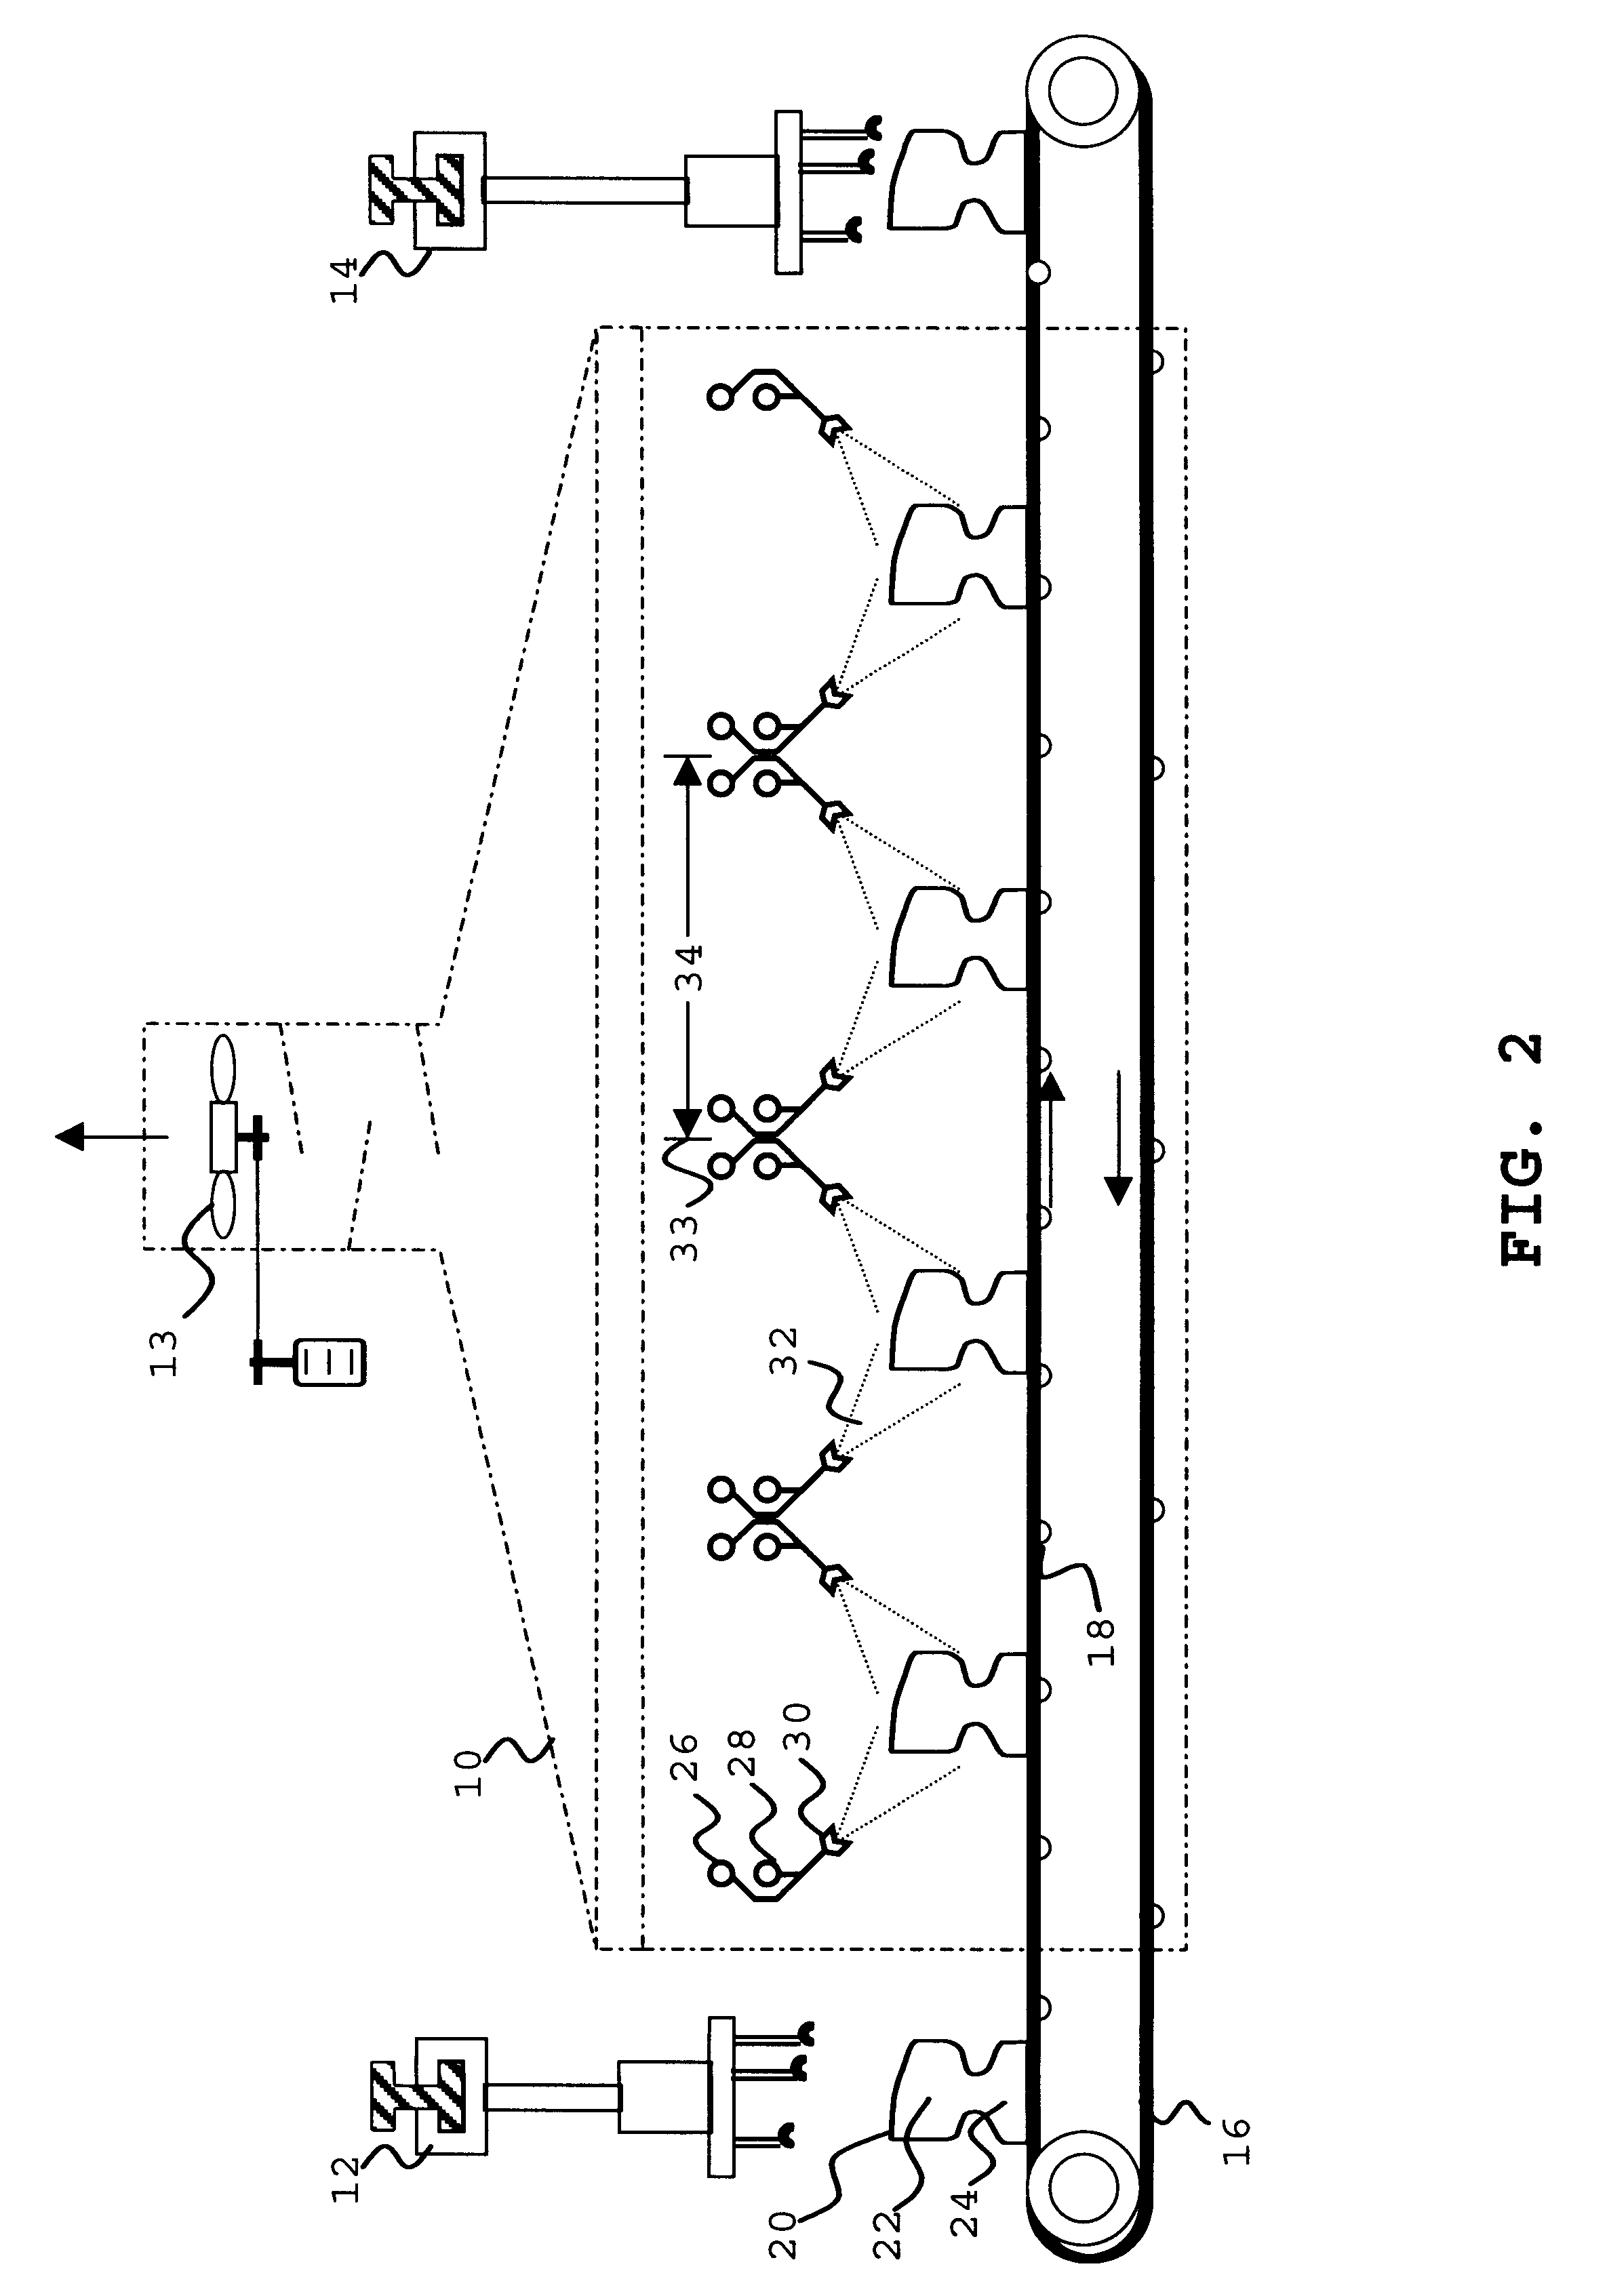 Method and apparatus for simplified production of heat treatable aluminum alloy castings with artificial self-aging